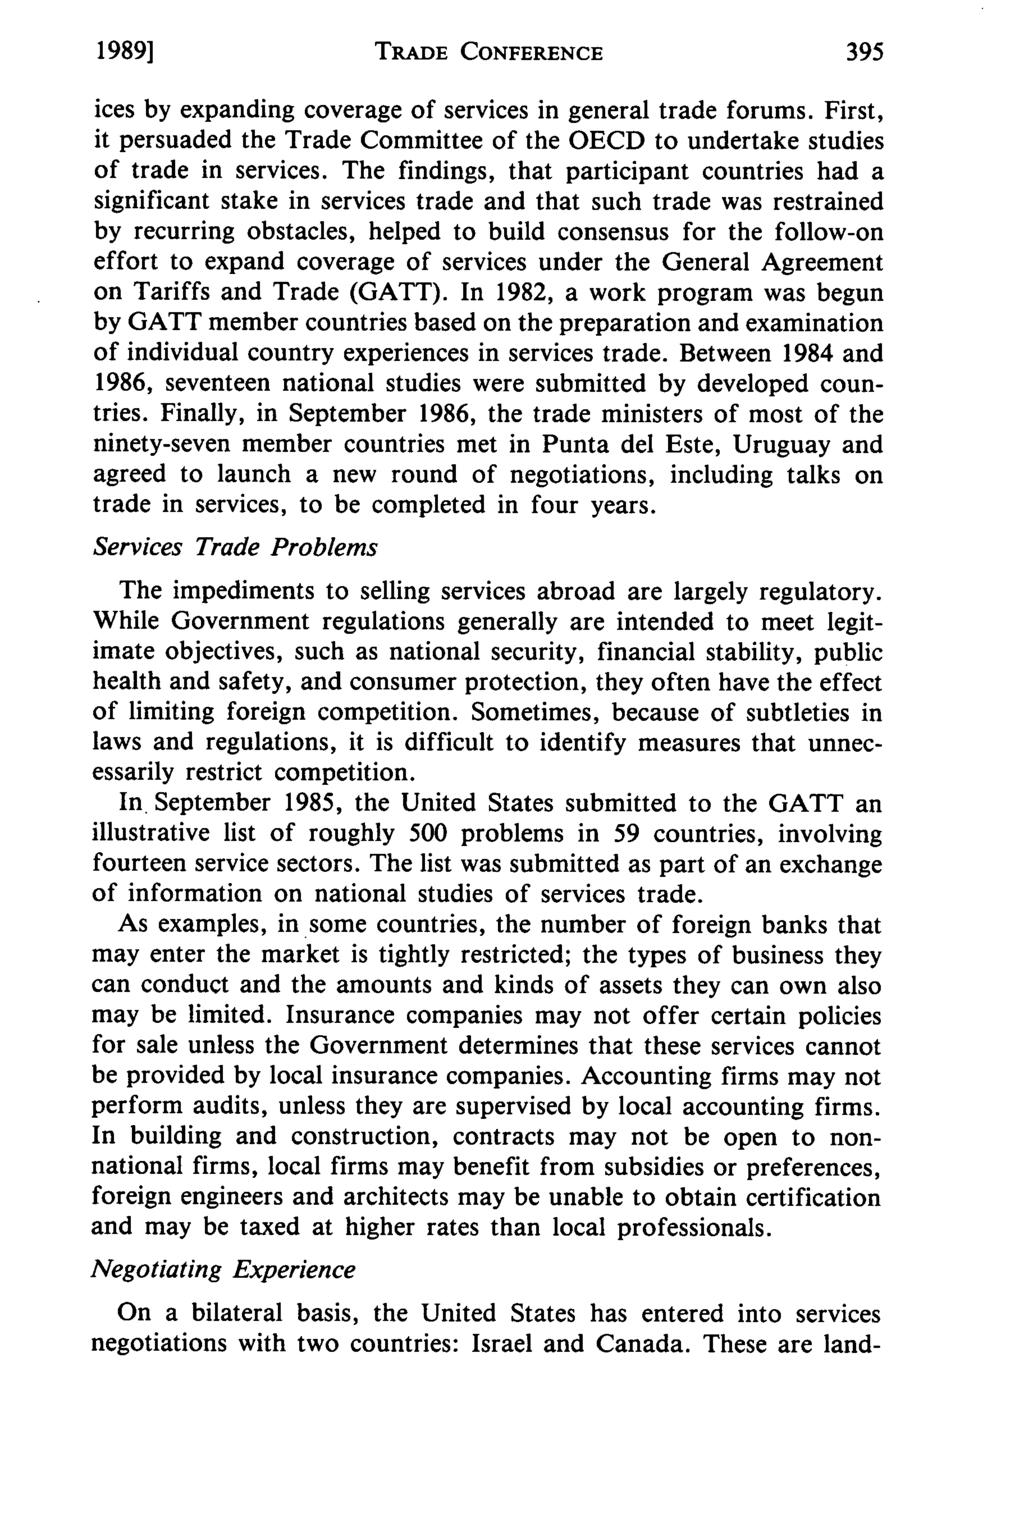 1989] TRADE CONFERENCE ices by expanding coverage of services in general trade forums. First, it persuaded the Trade Committee of the OECD to undertake studies of trade in services.